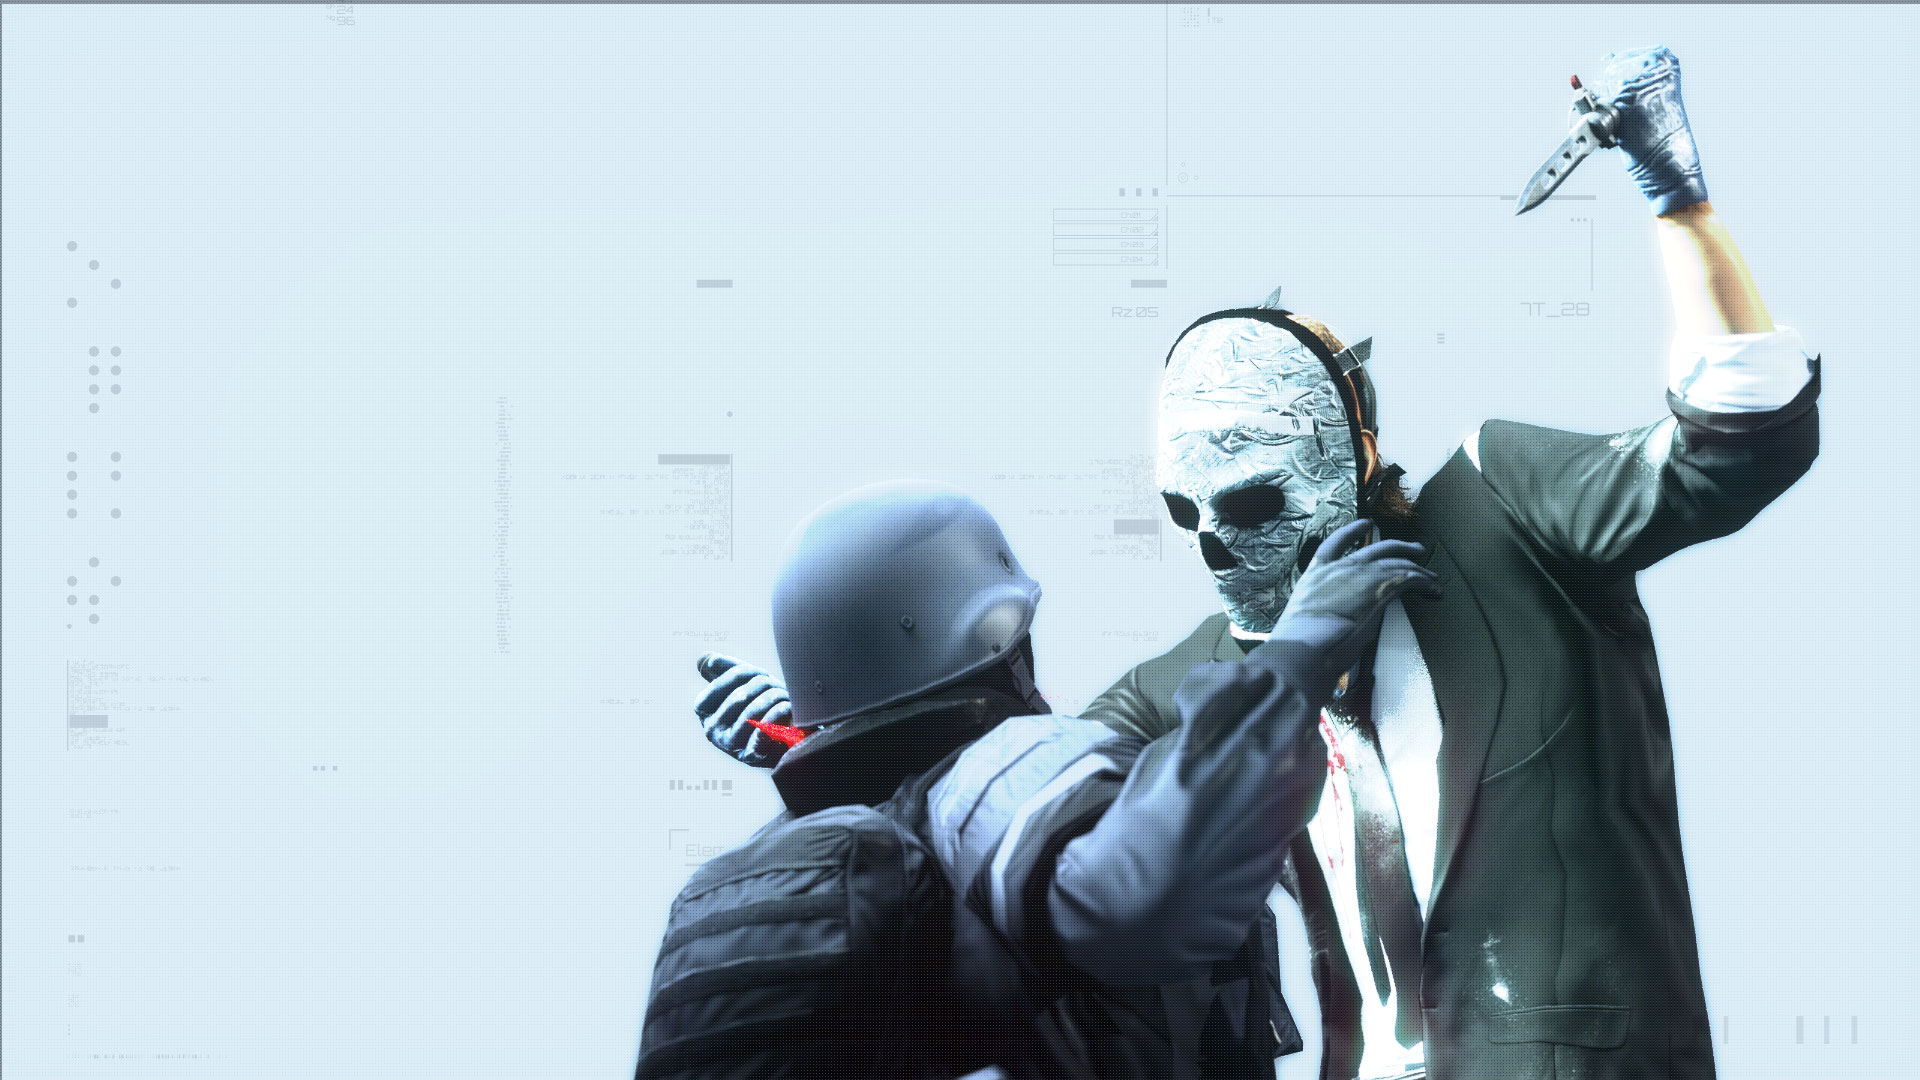 Jacket payday 2 trailer song фото 86